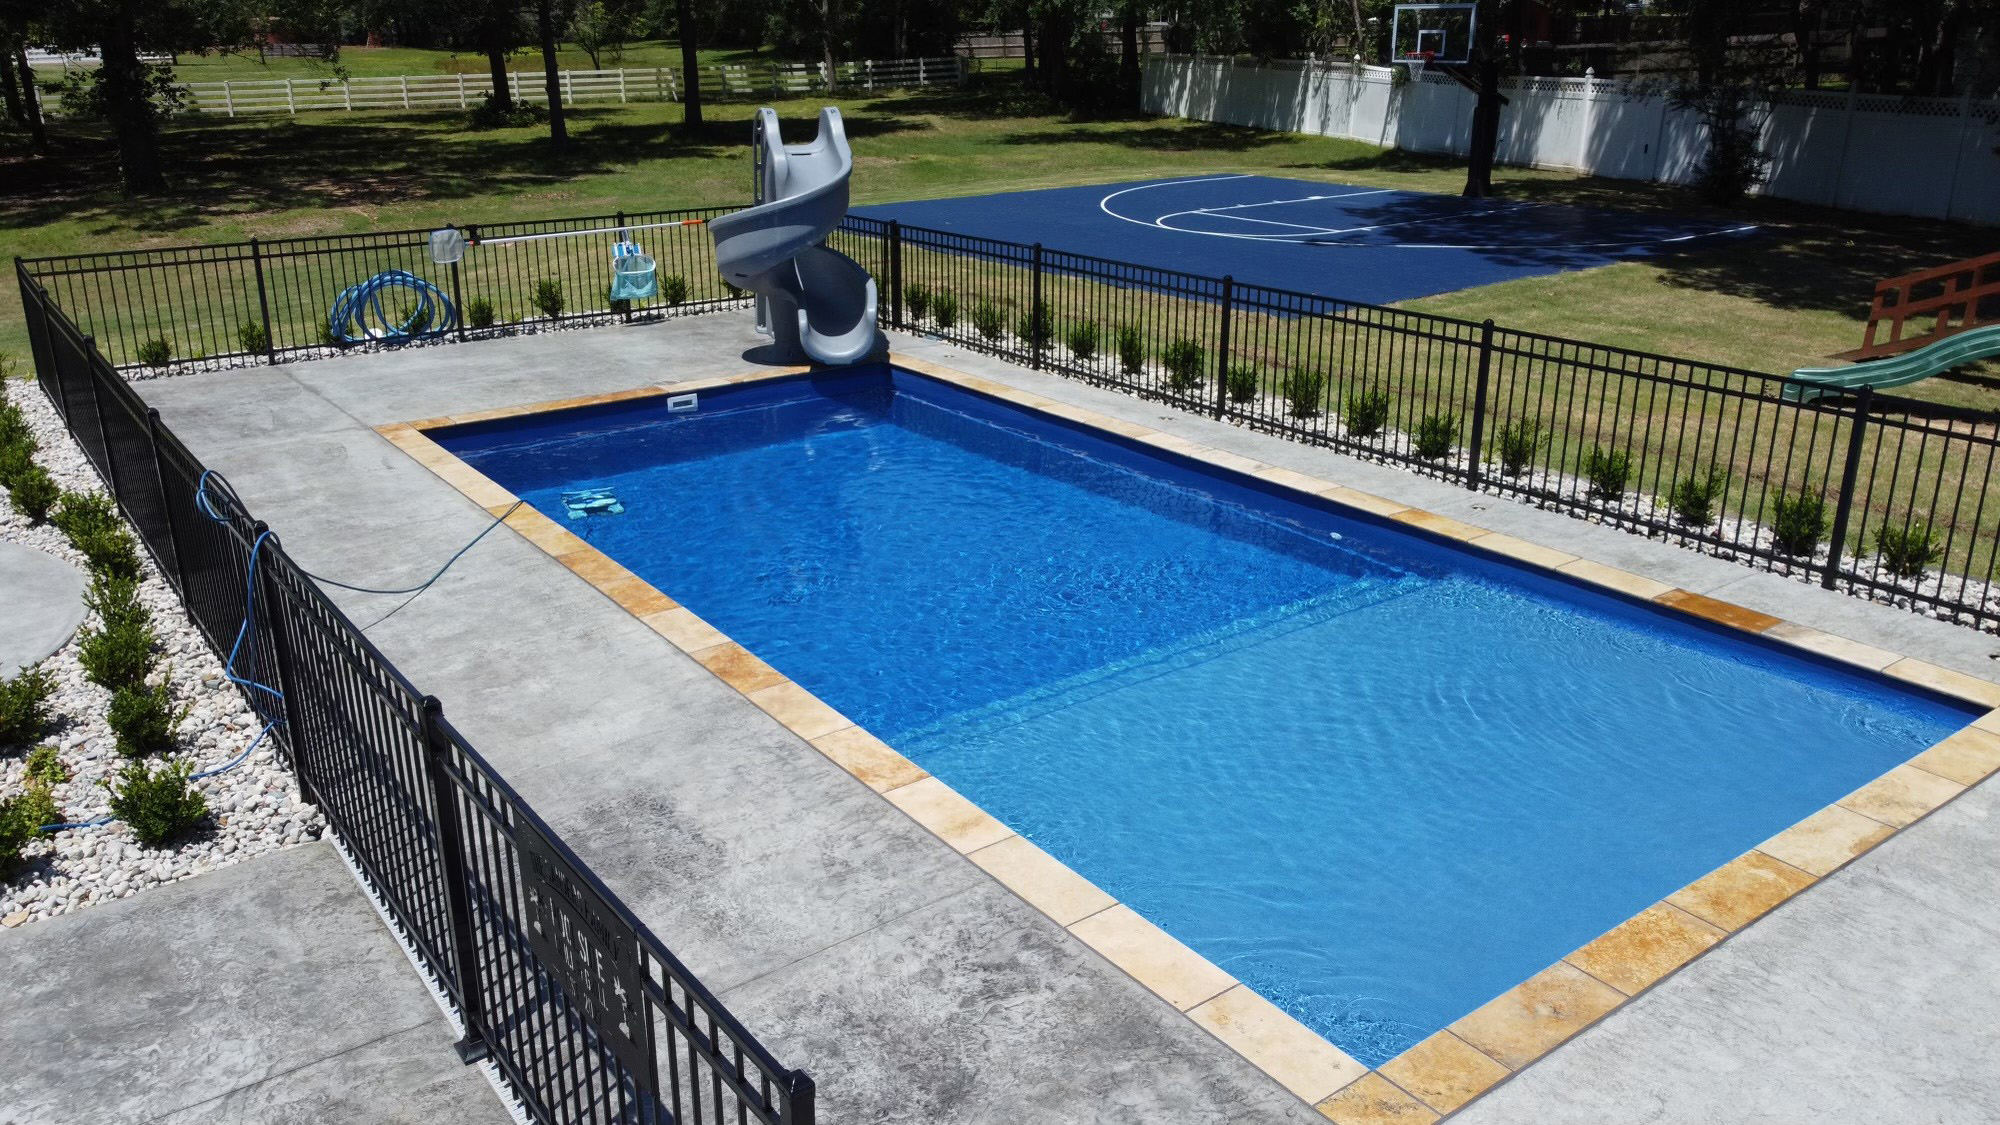 Inground Fiberglass Pool Atascosa Texas by Lonestar Pools for a private backyard oasis and staycation without the hassle of leaving town